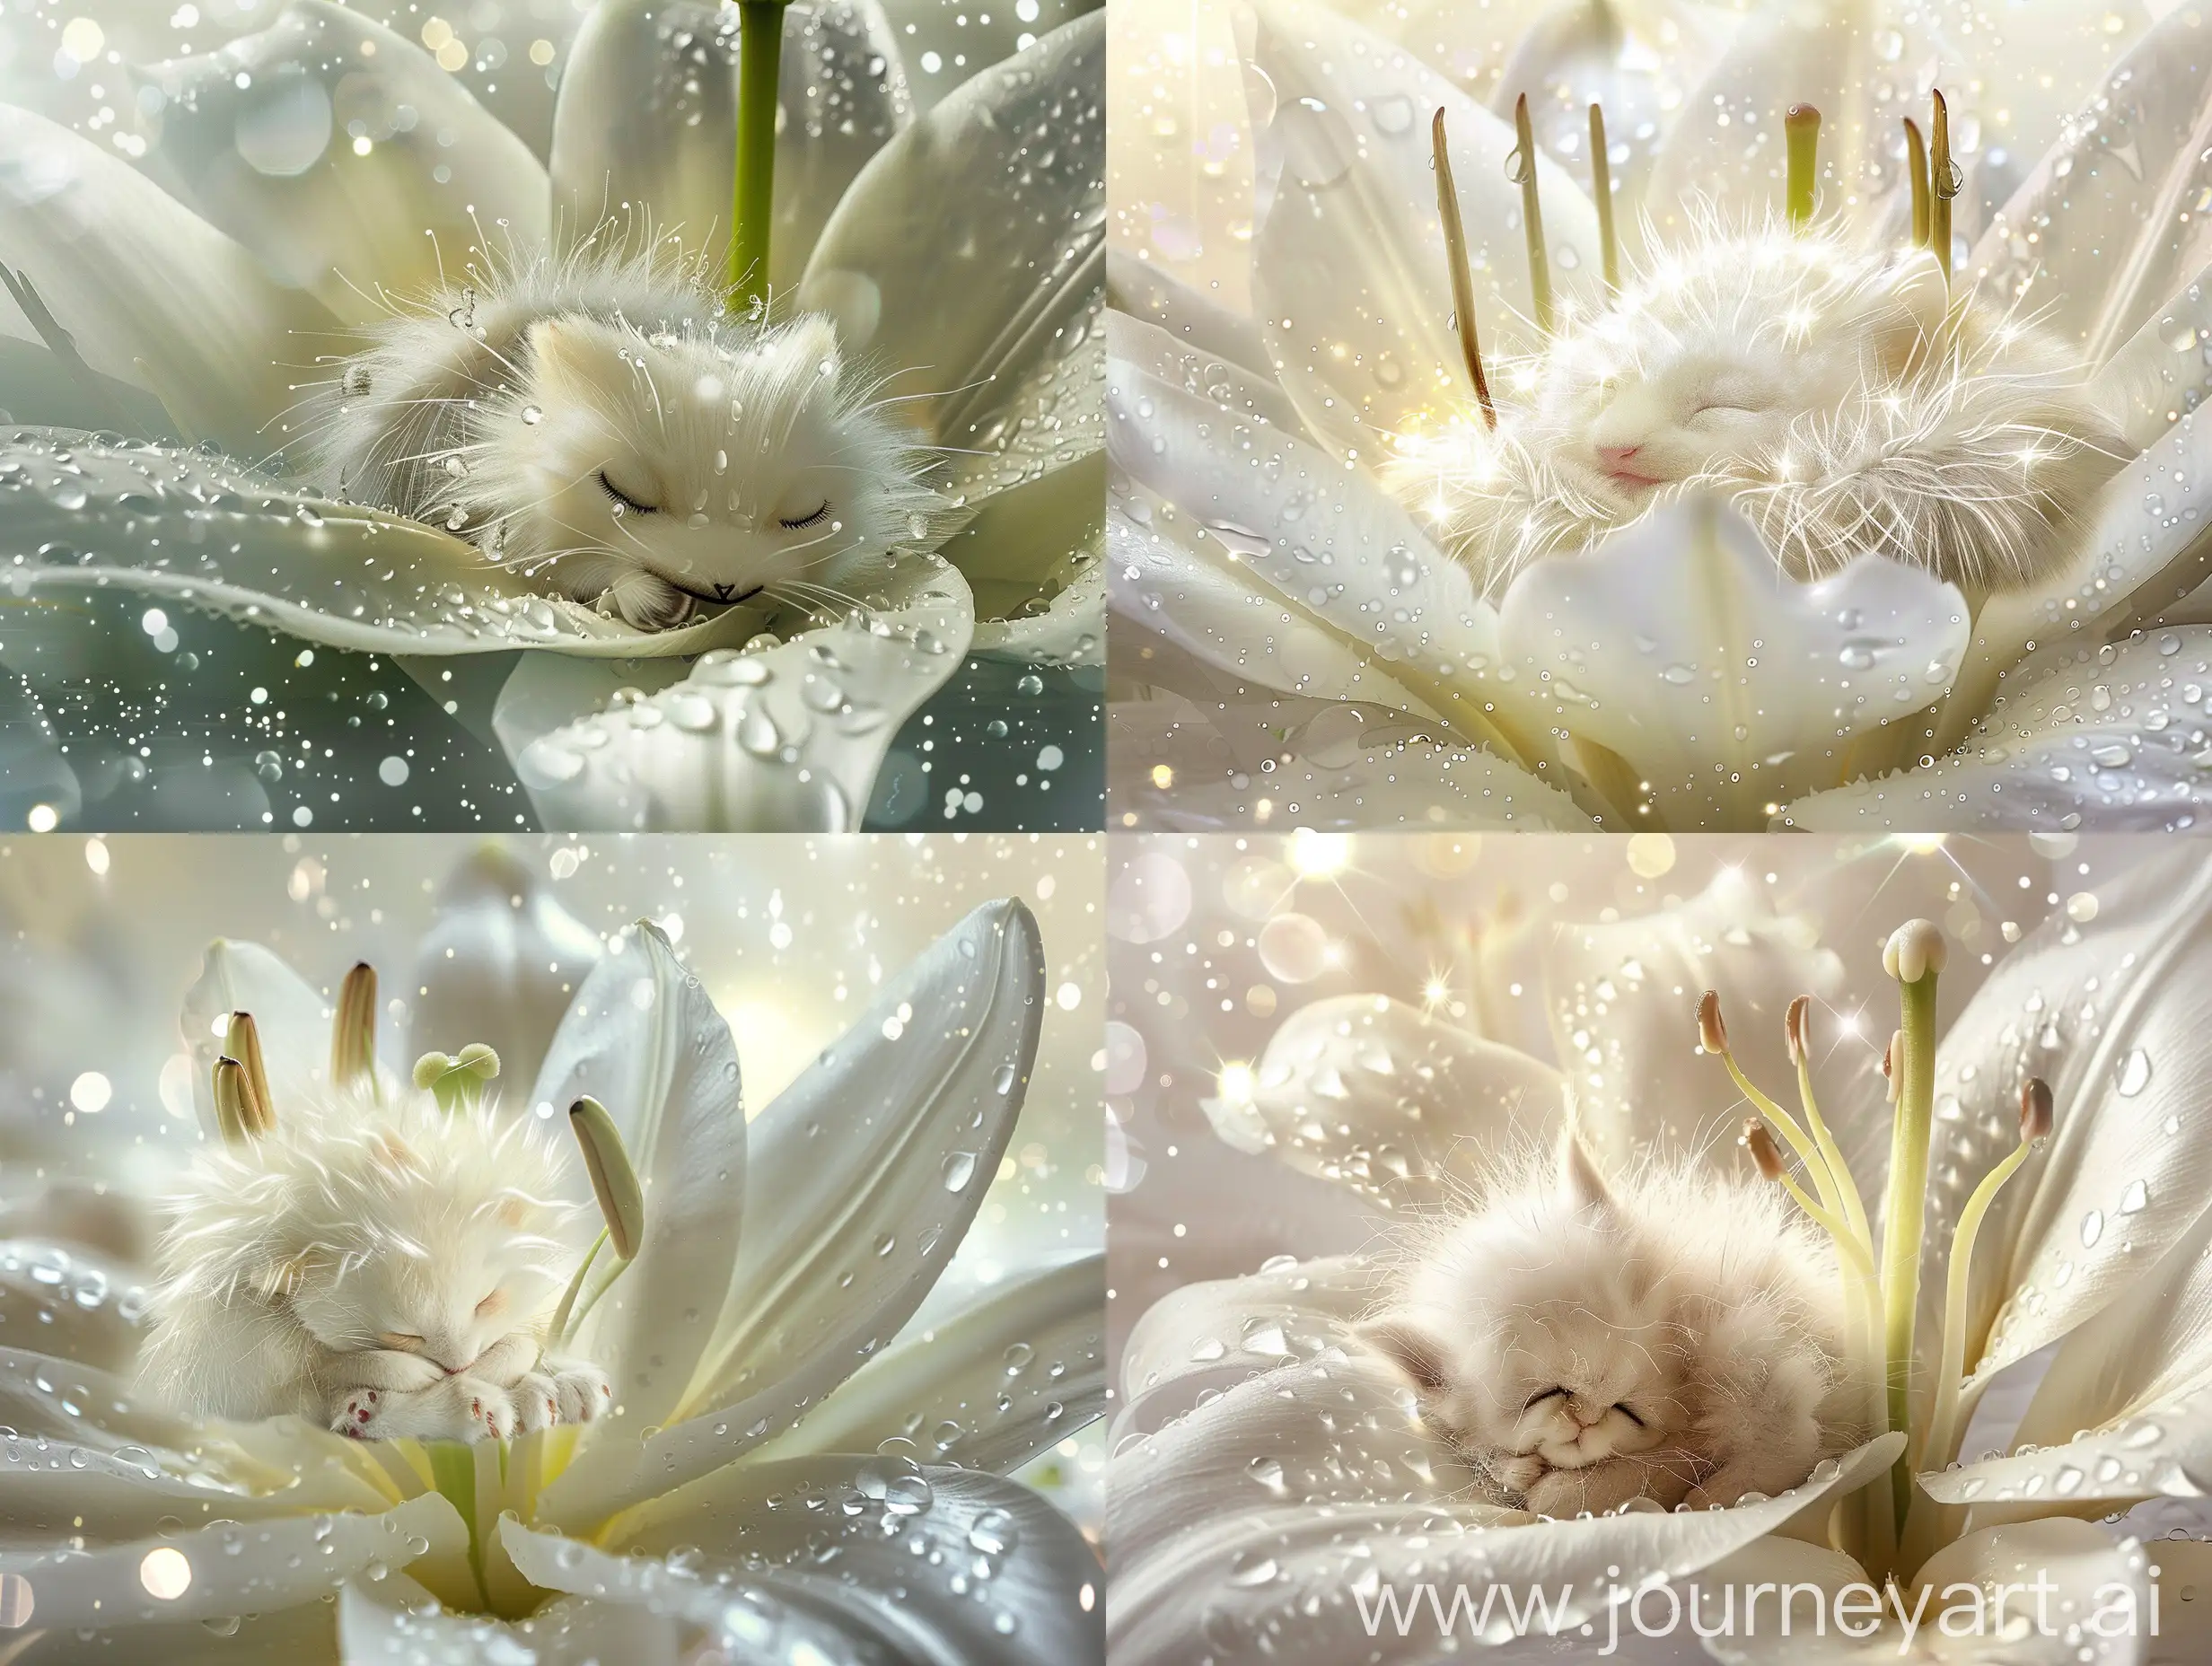 Adorable-Sleeping-Fluffy-Creature-in-Large-Lily-Flower